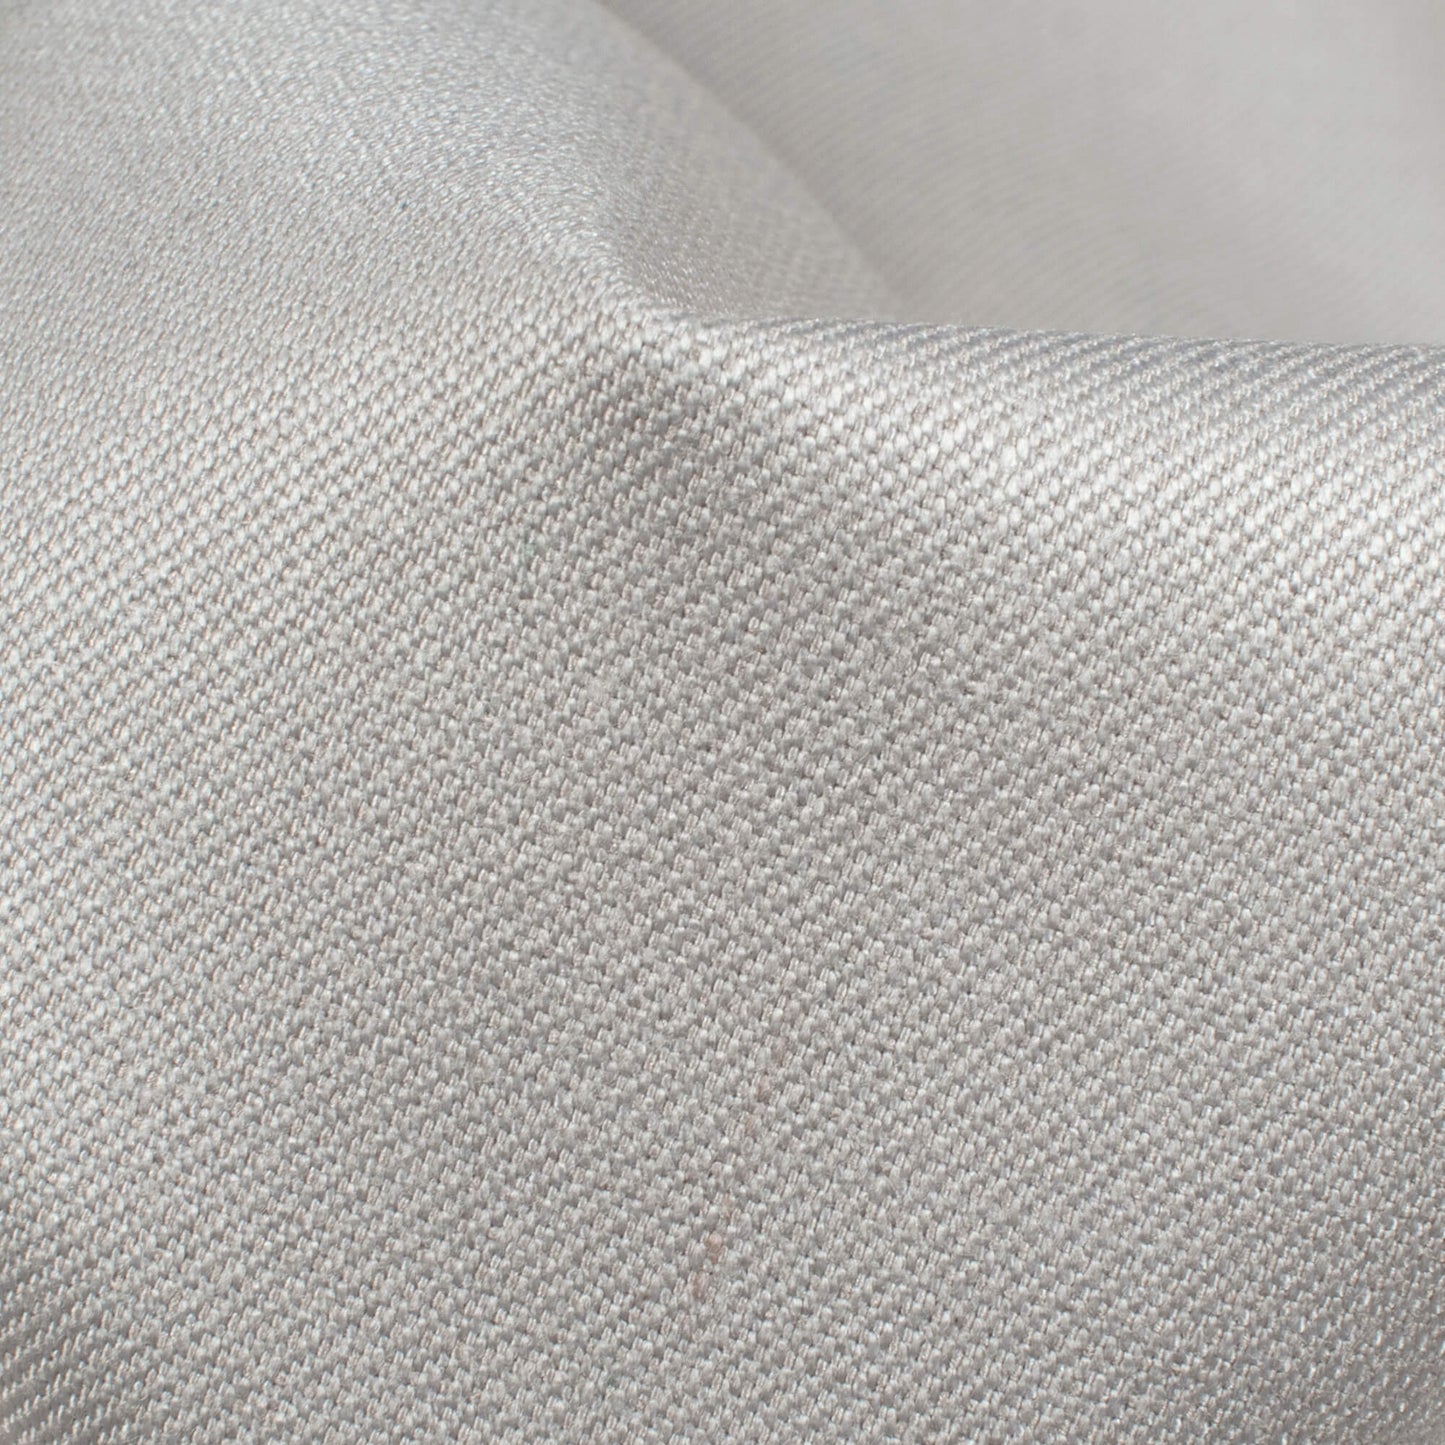 Slate Grey Plain Luxury Suiting Fabric (Width 58 Inches)